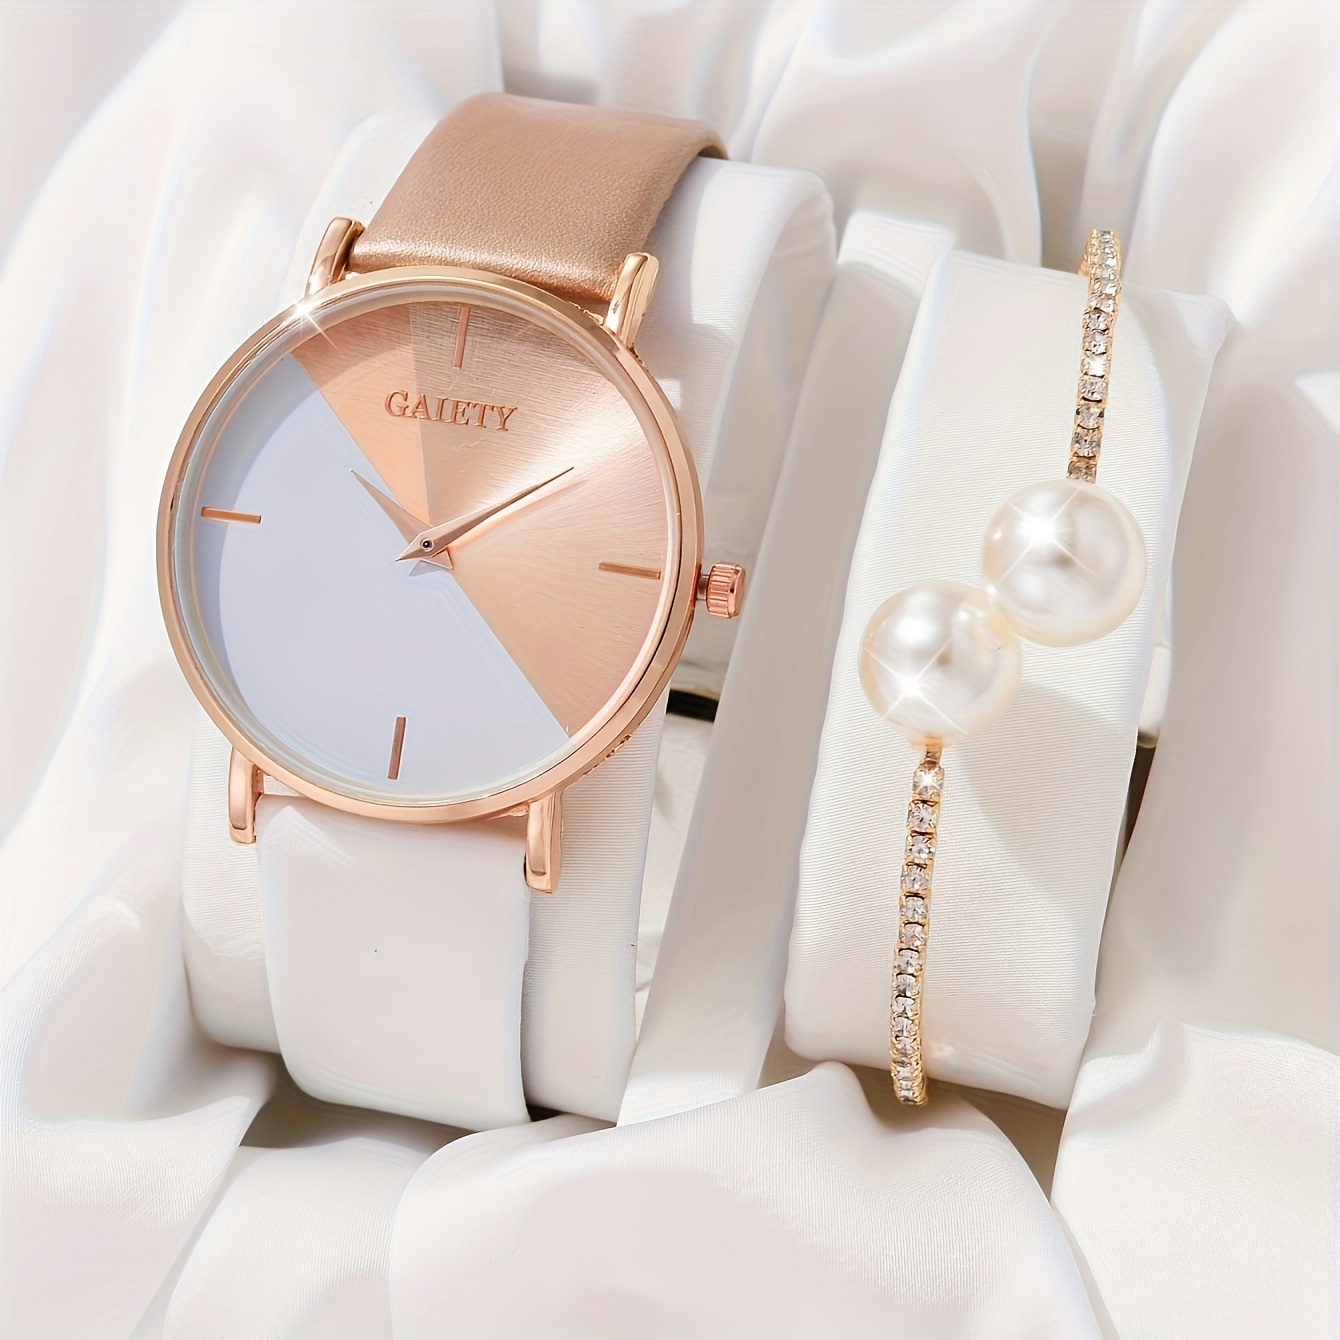 

Elegant Women's Watch Pu Leather Wristwatch With Rose Gold Dial With Pearl Bracelet With Rhinestone Accents